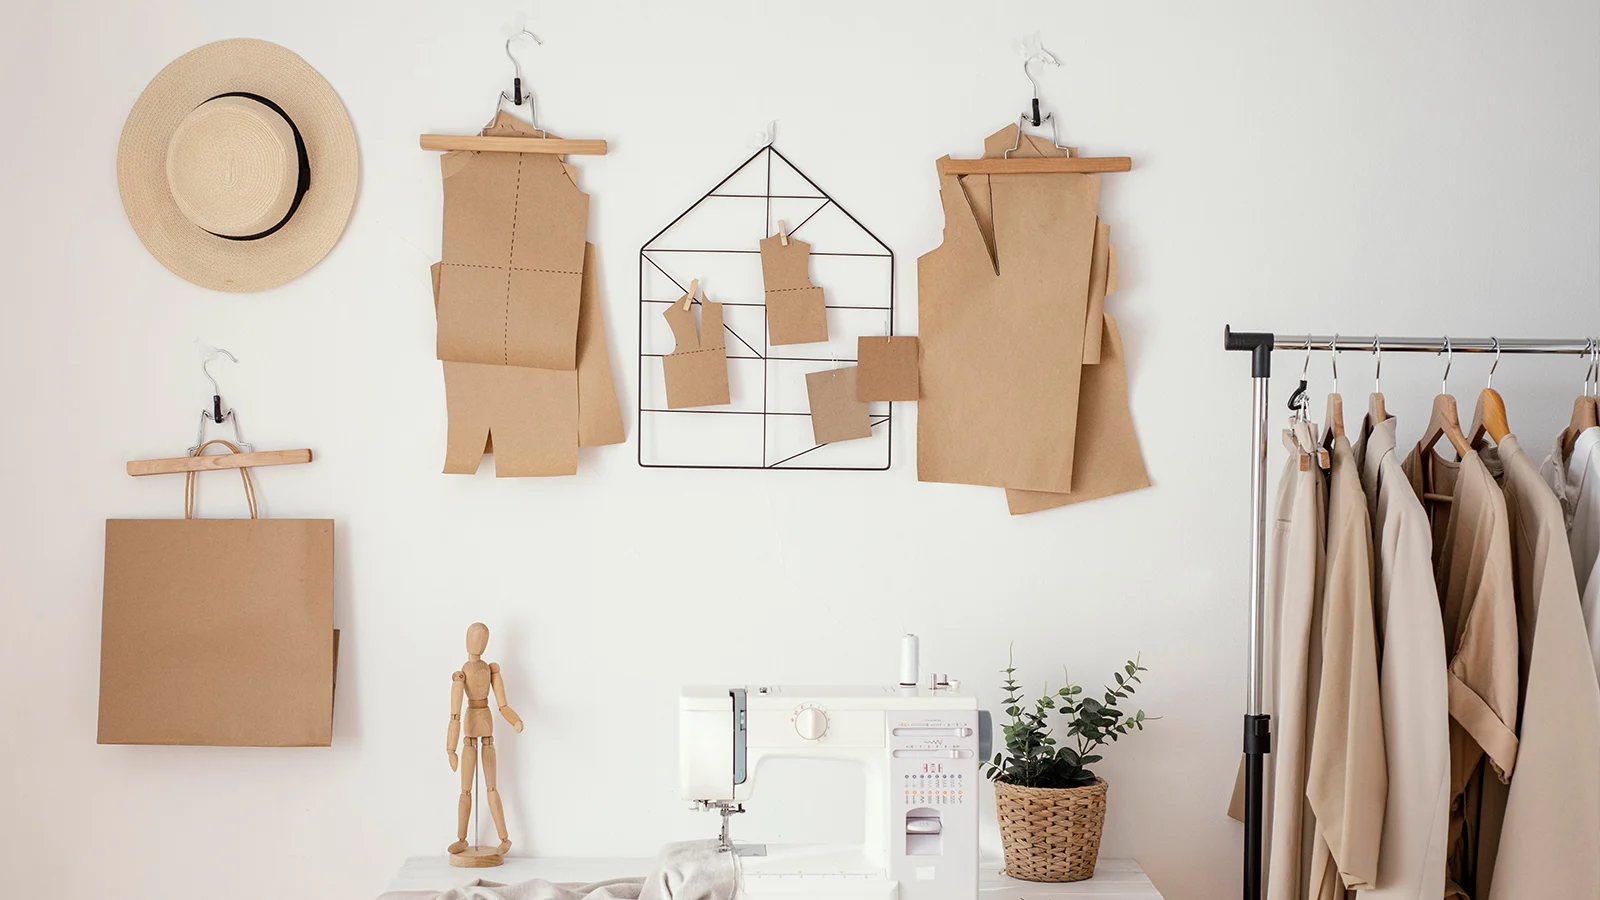 How to Store Sewing Patterns: 11 Efficient Pattern Storage Ideas